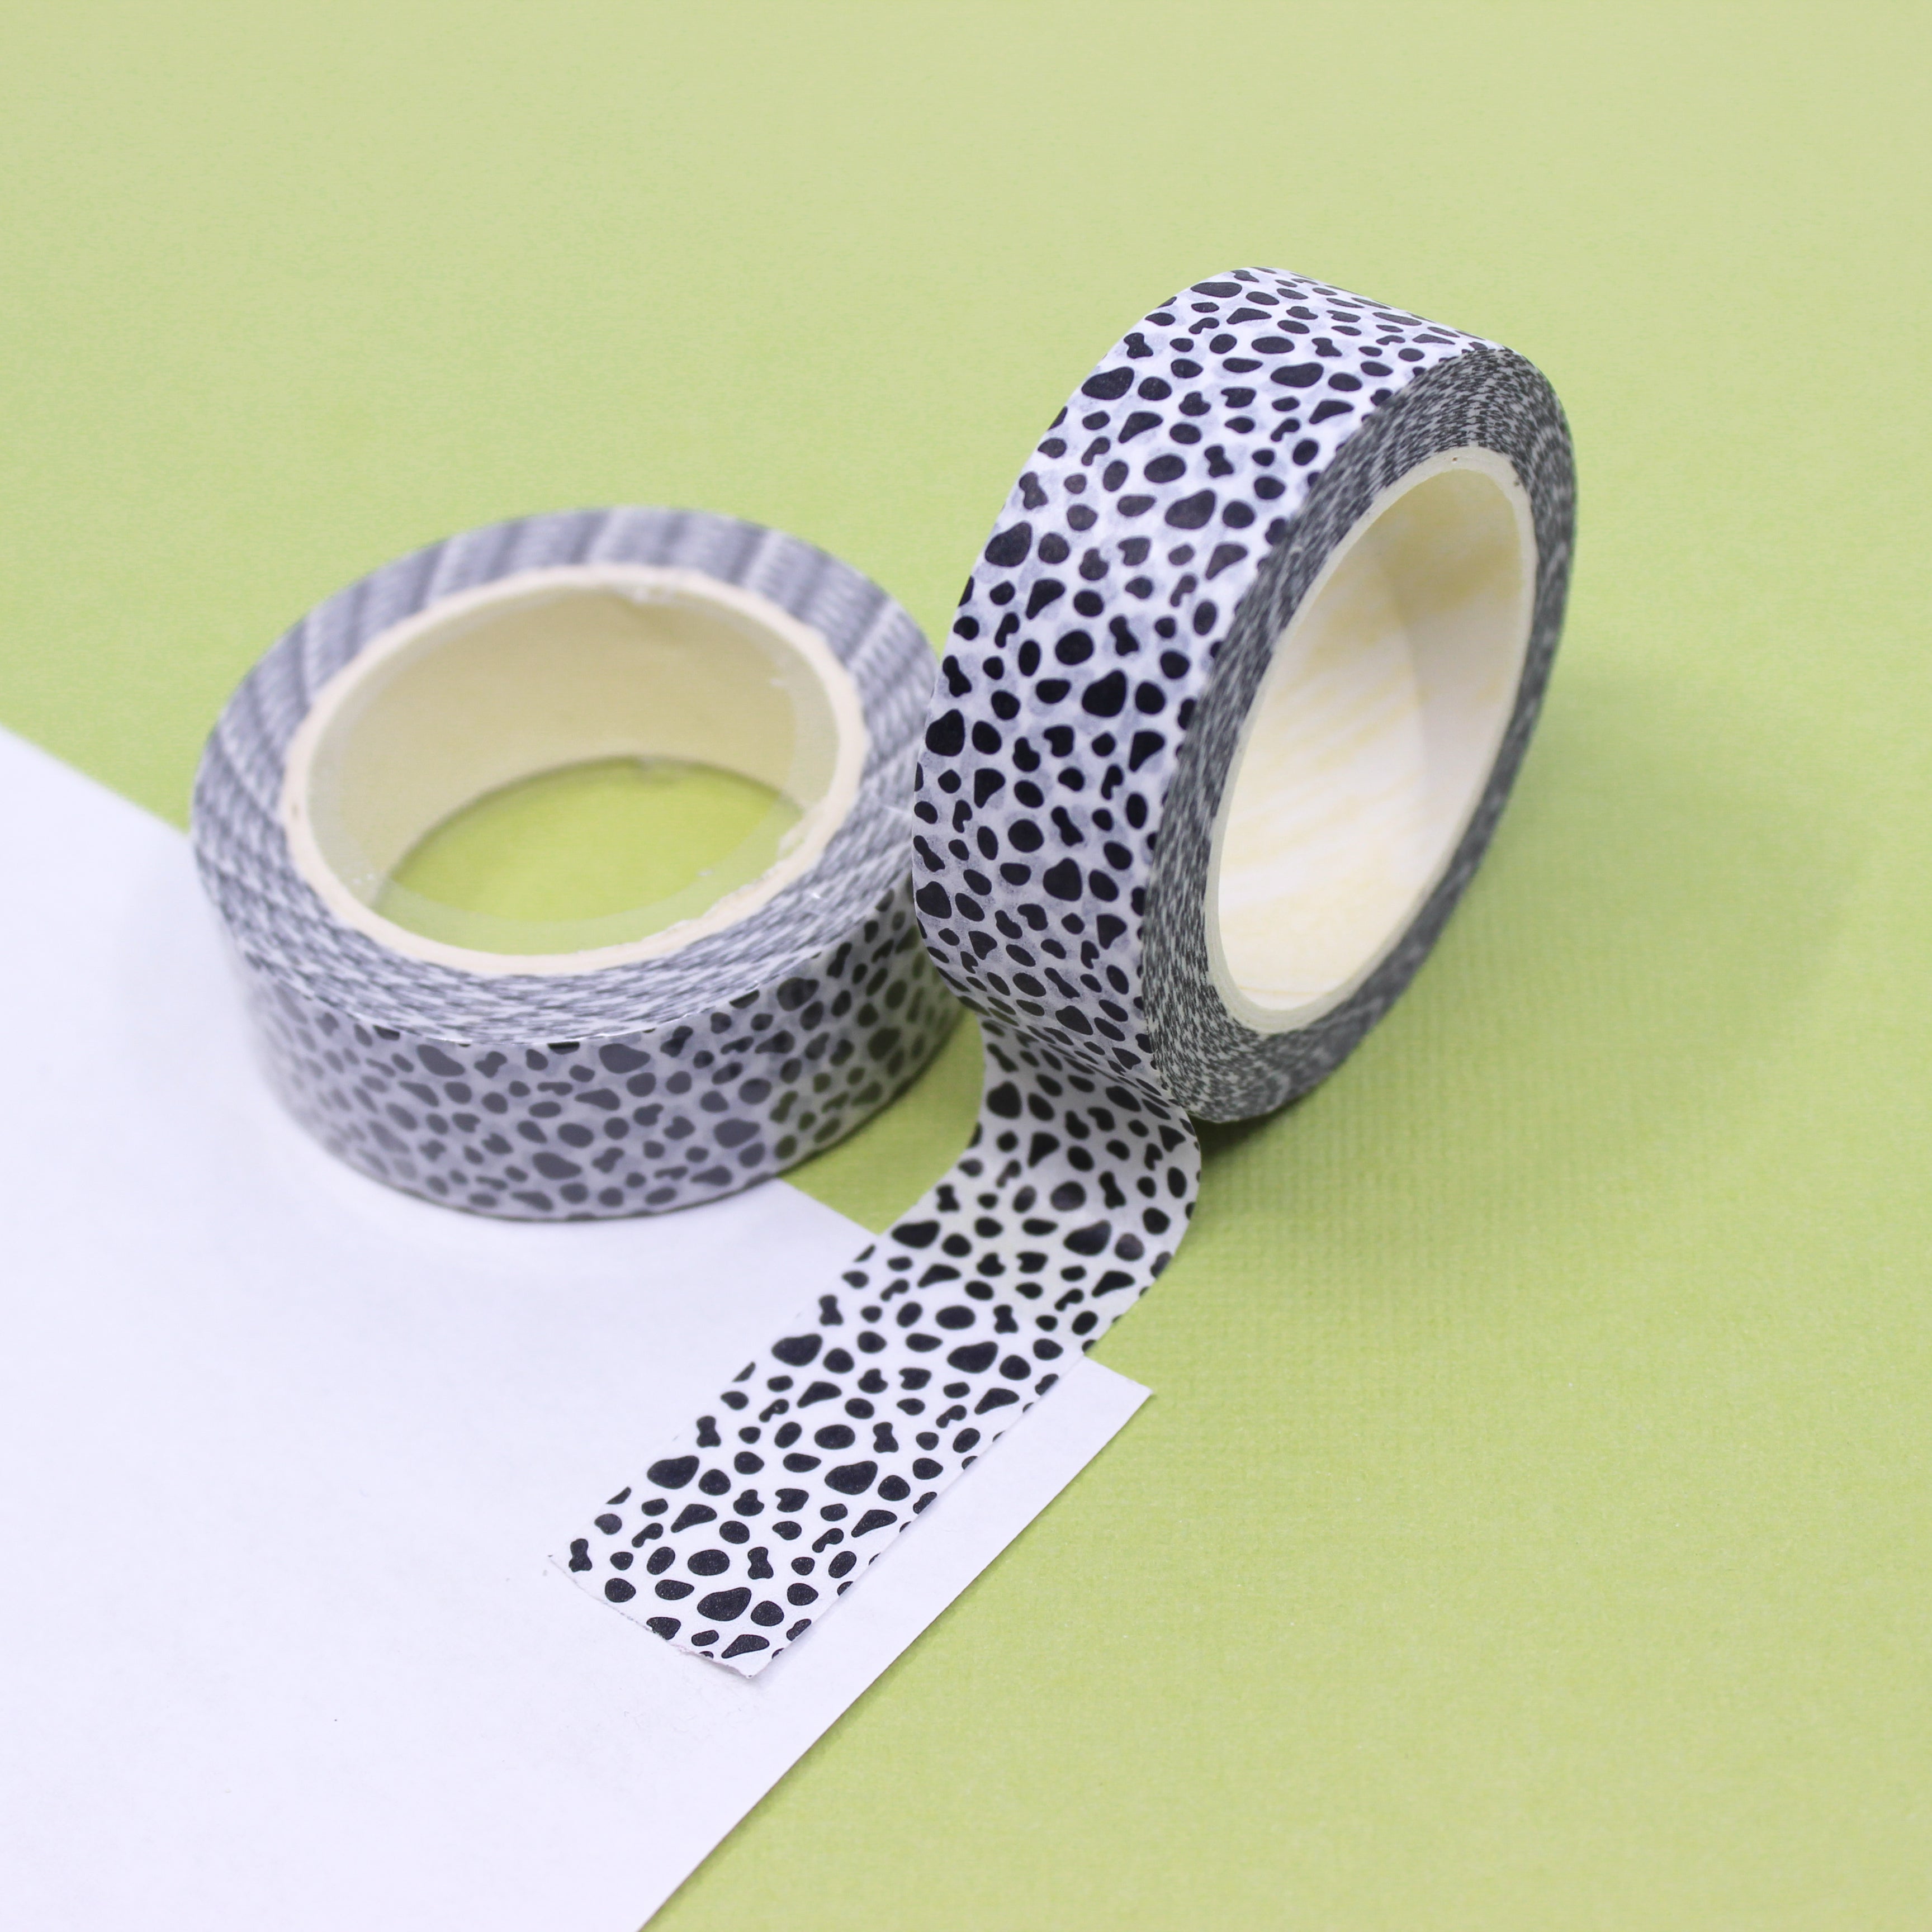 This is a white leopard animal print themed washi tape from BBB Supplies Craft Shop